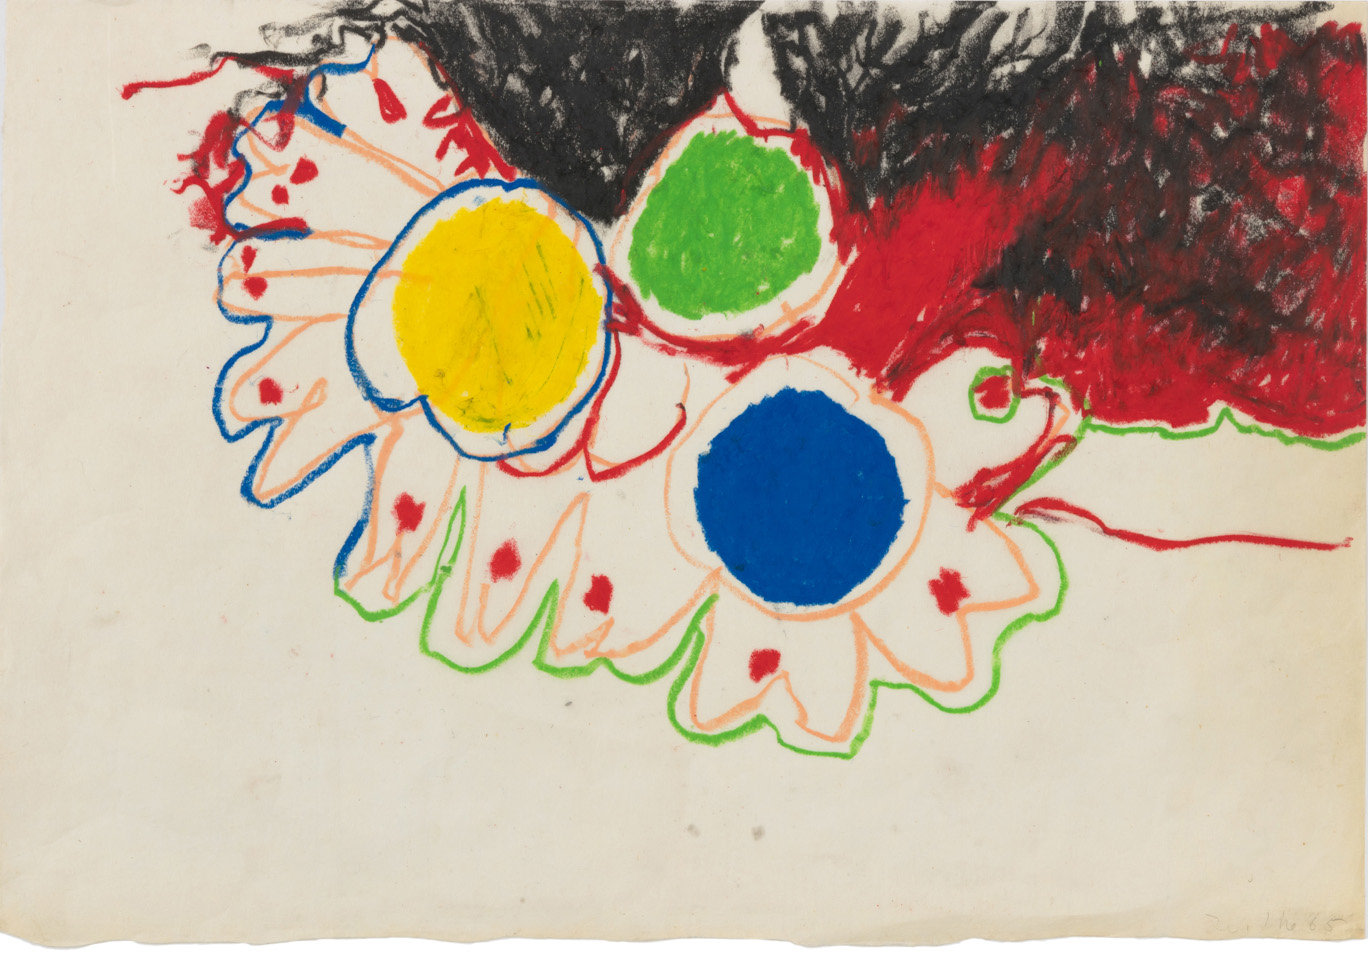 An untitled work on paper by Hannah Wilke from 1965